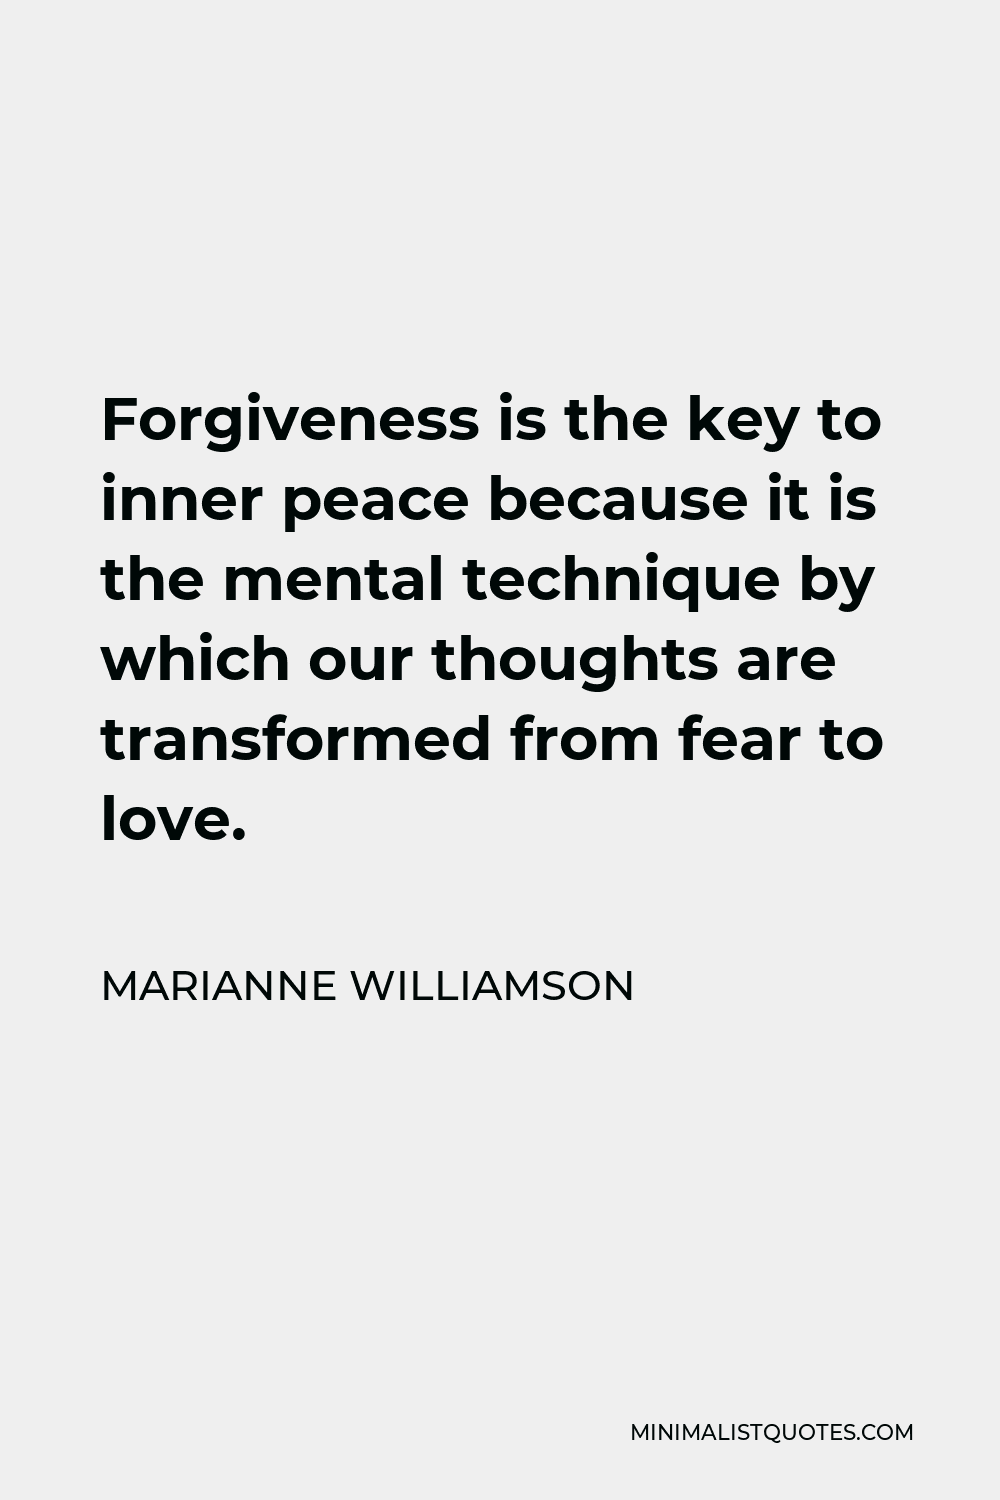 Marianne Williamson Quote - Forgiveness is the key to inner peace because it is the mental technique by which our thoughts are transformed from fear to love.